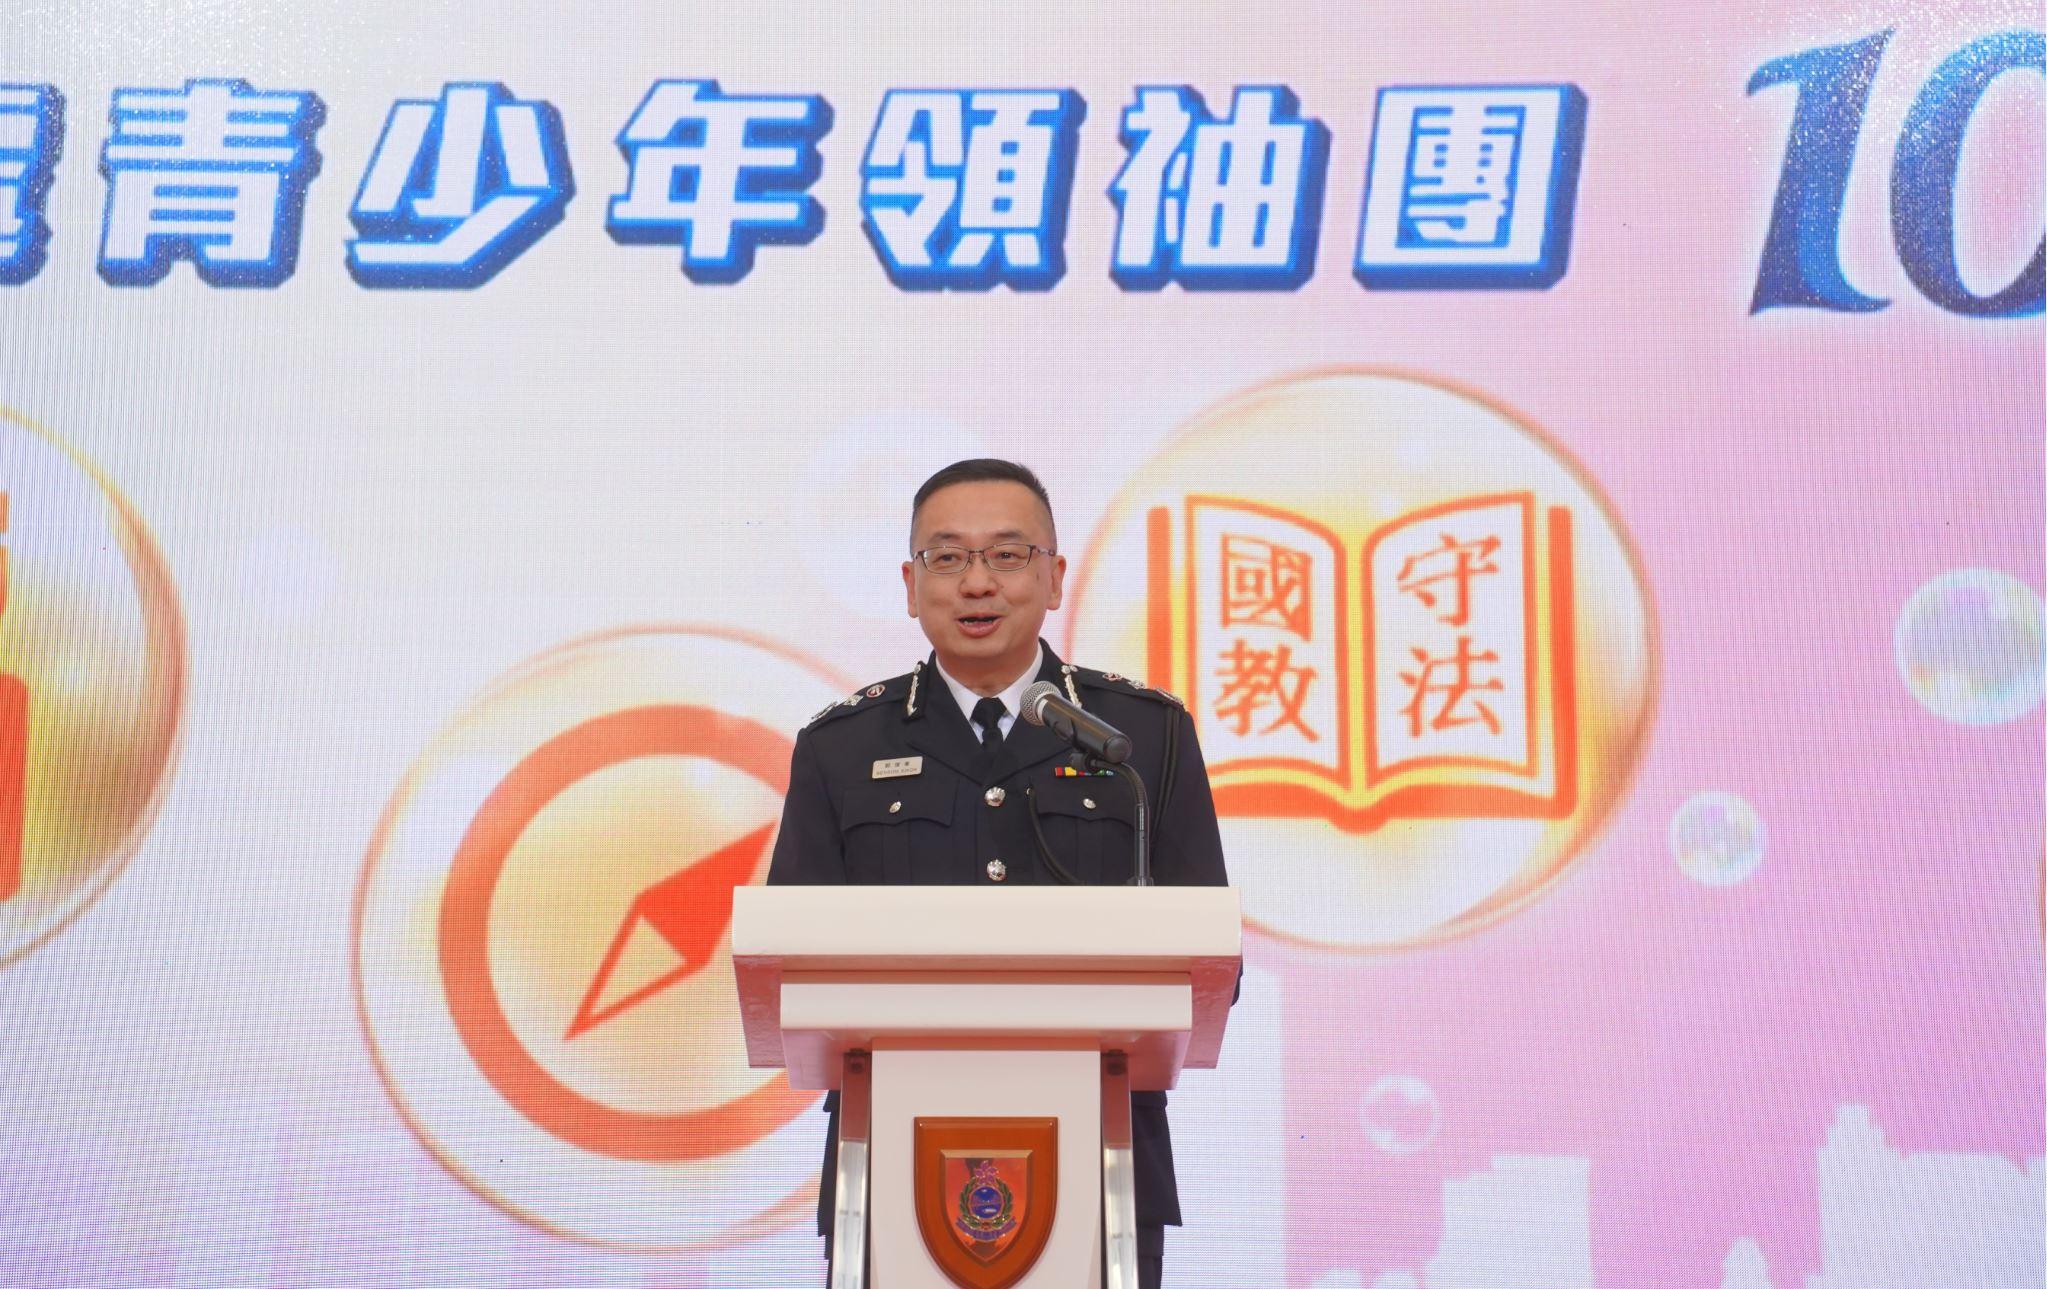 The Director of Immigration, Mr Benson Kwok, delivers a speech at the Immigration Department Youth Leaders Corps 10th Anniversary Celebration Ceremony today (December 29).